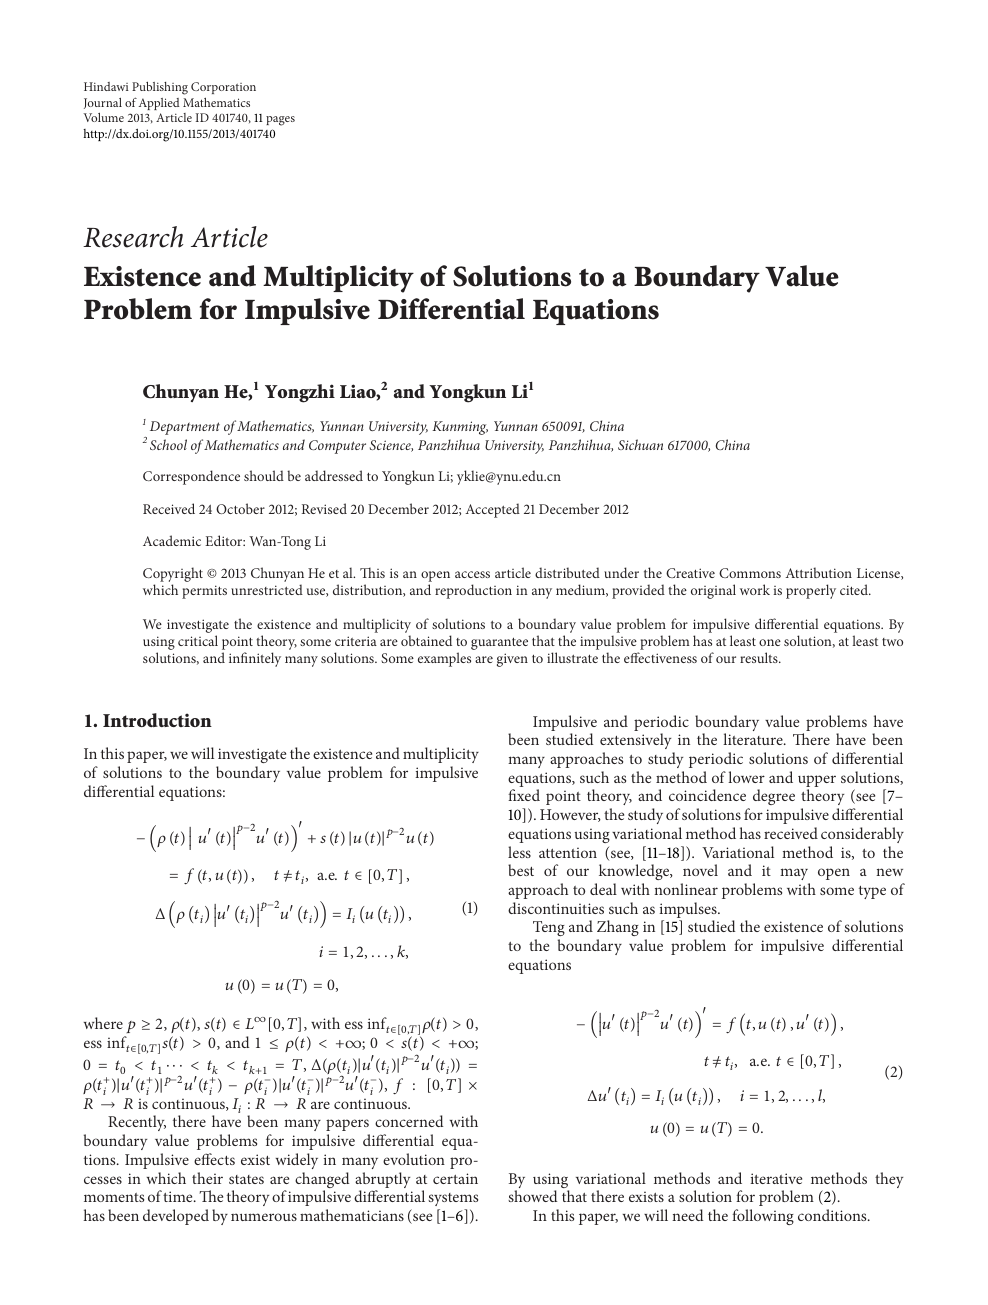 Existence And Multiplicity Of Solutions To A Boundary Value Problem For Impulsive Differential Equations Topic Of Research Paper In Mathematics Download Scholarly Article Pdf And Read For Free On Cyberleninka Open